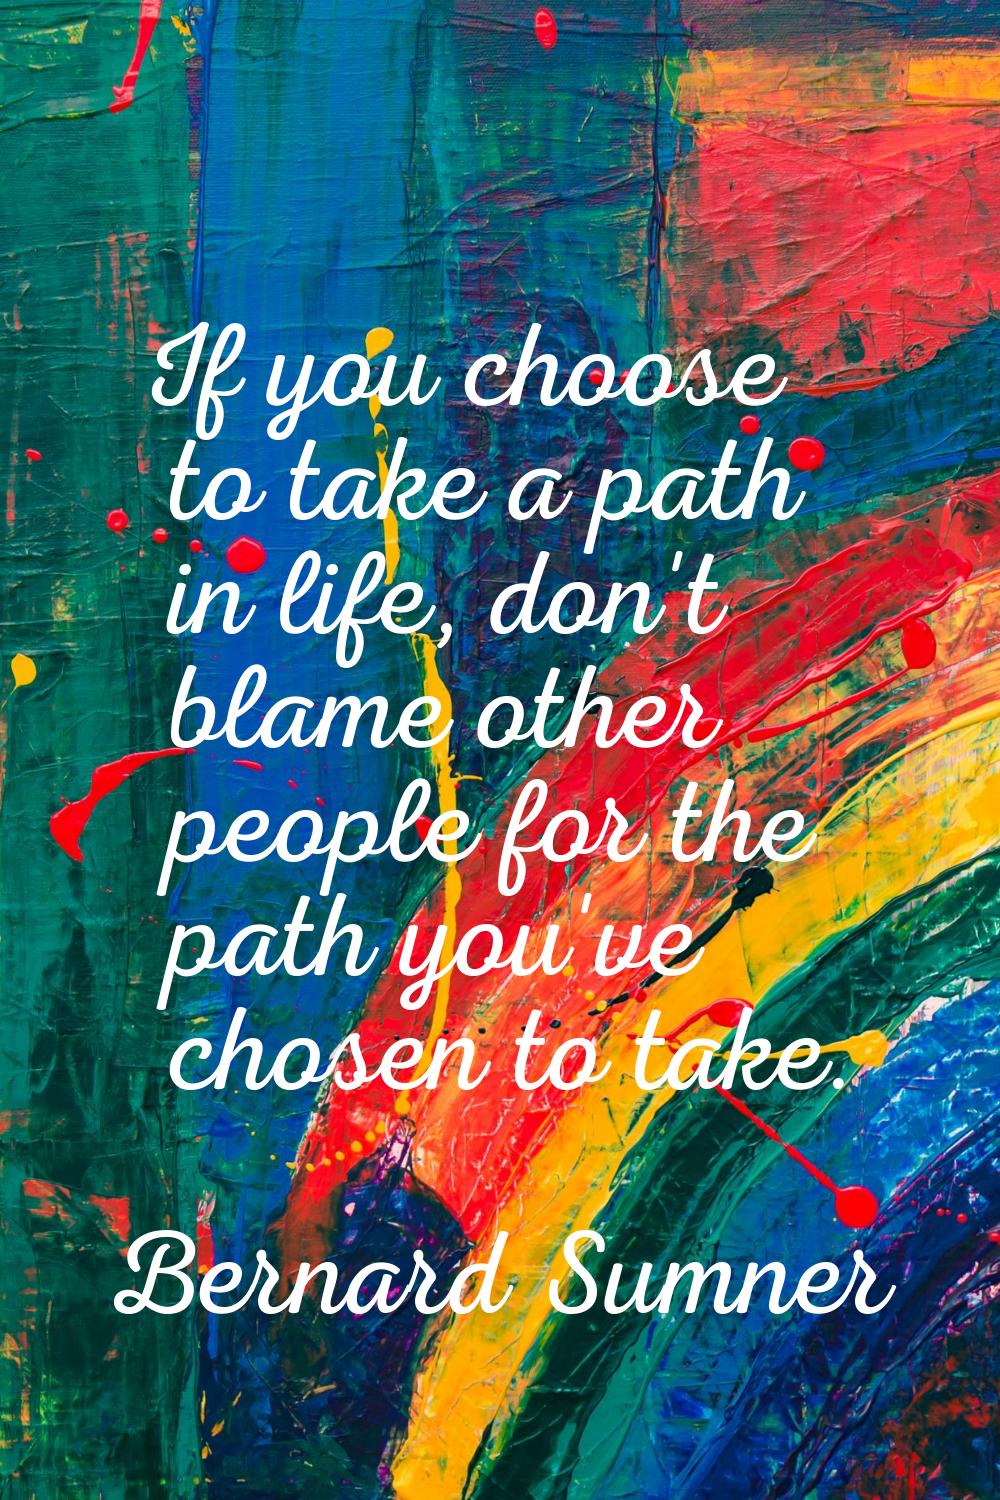 If you choose to take a path in life, don't blame other people for the path you've chosen to take.